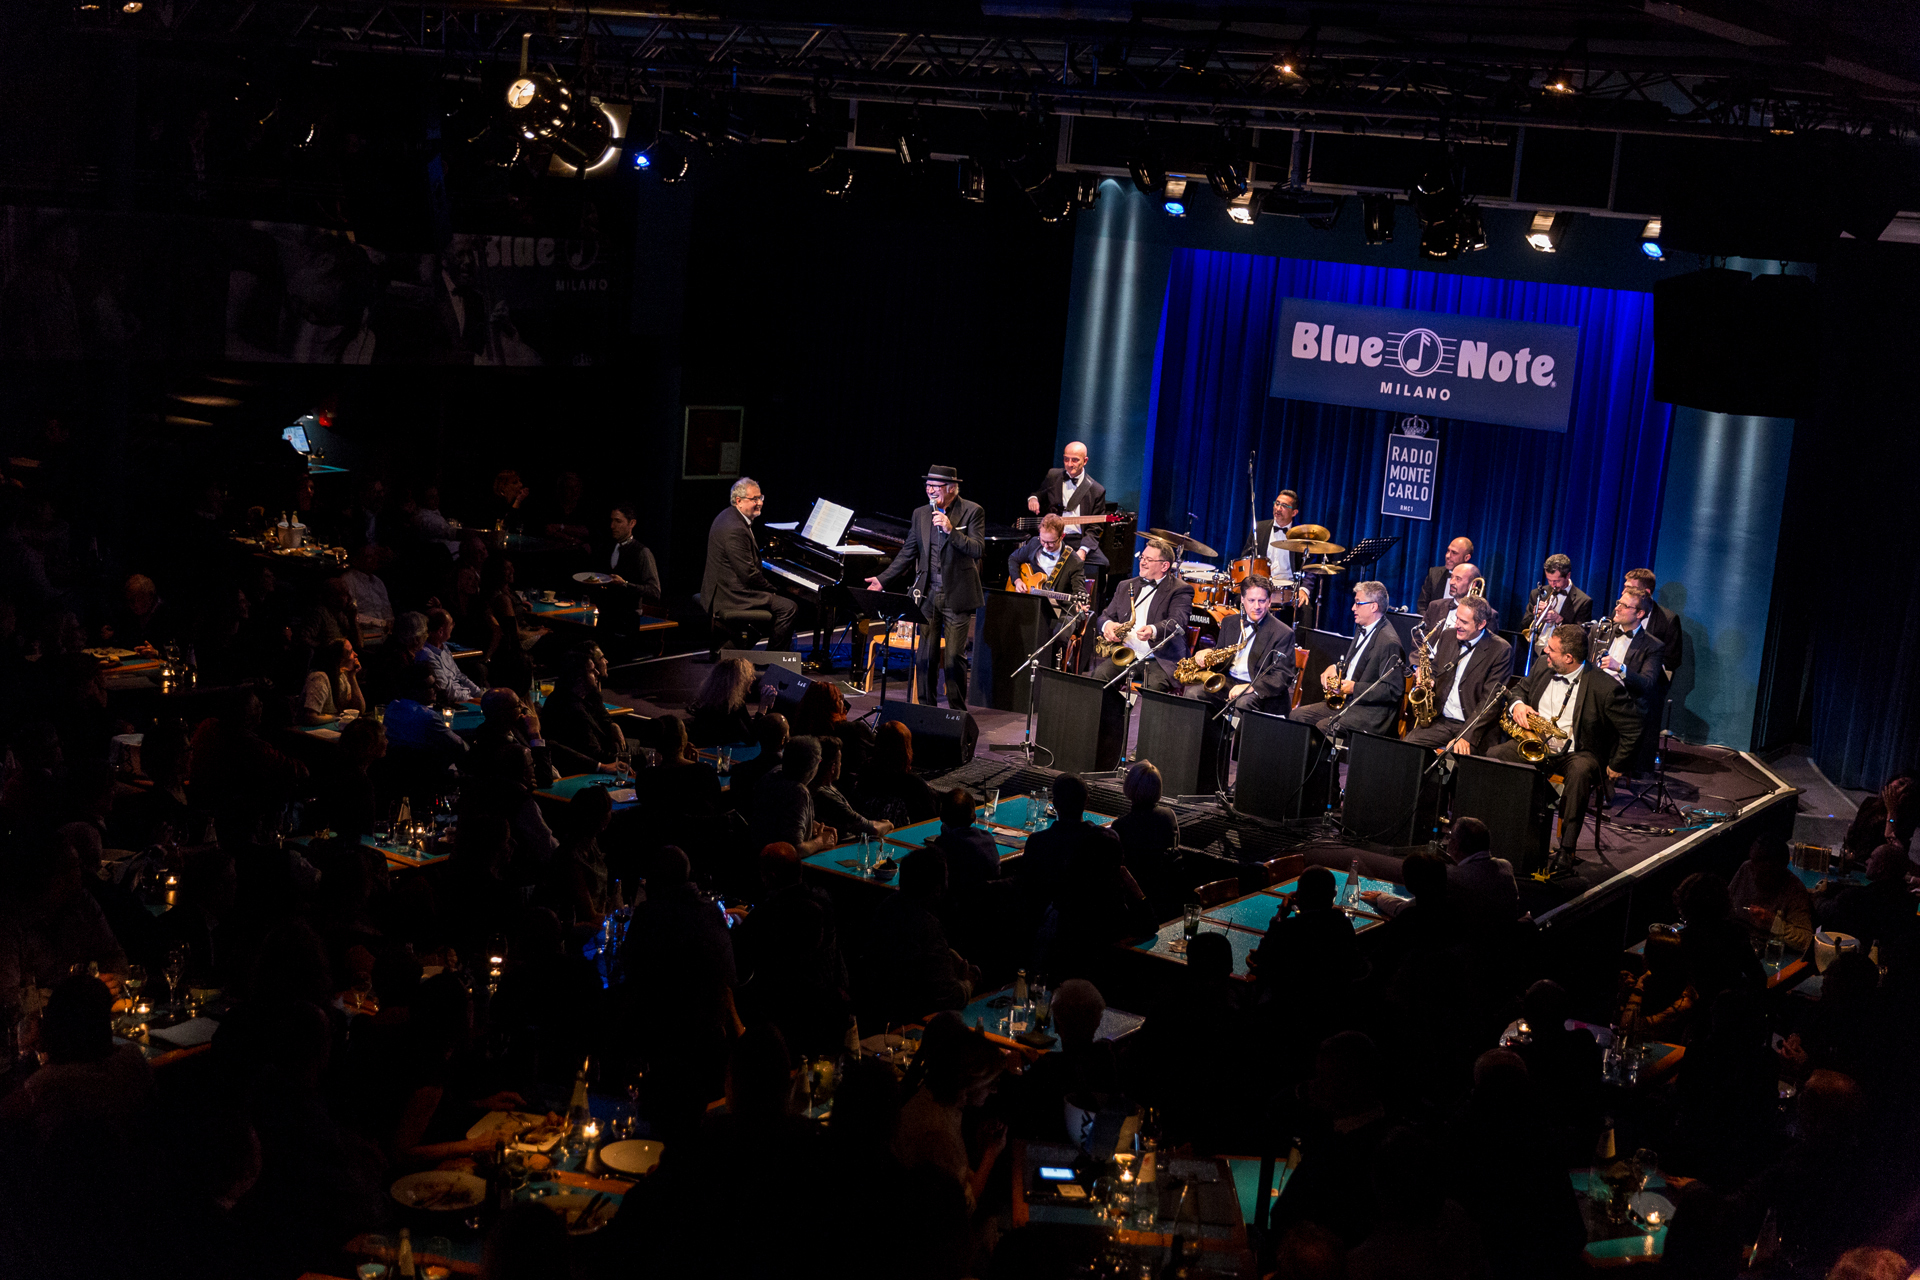 2016_10_15_Nick_Orchestra_Blue_Note_212130_5D3_7958